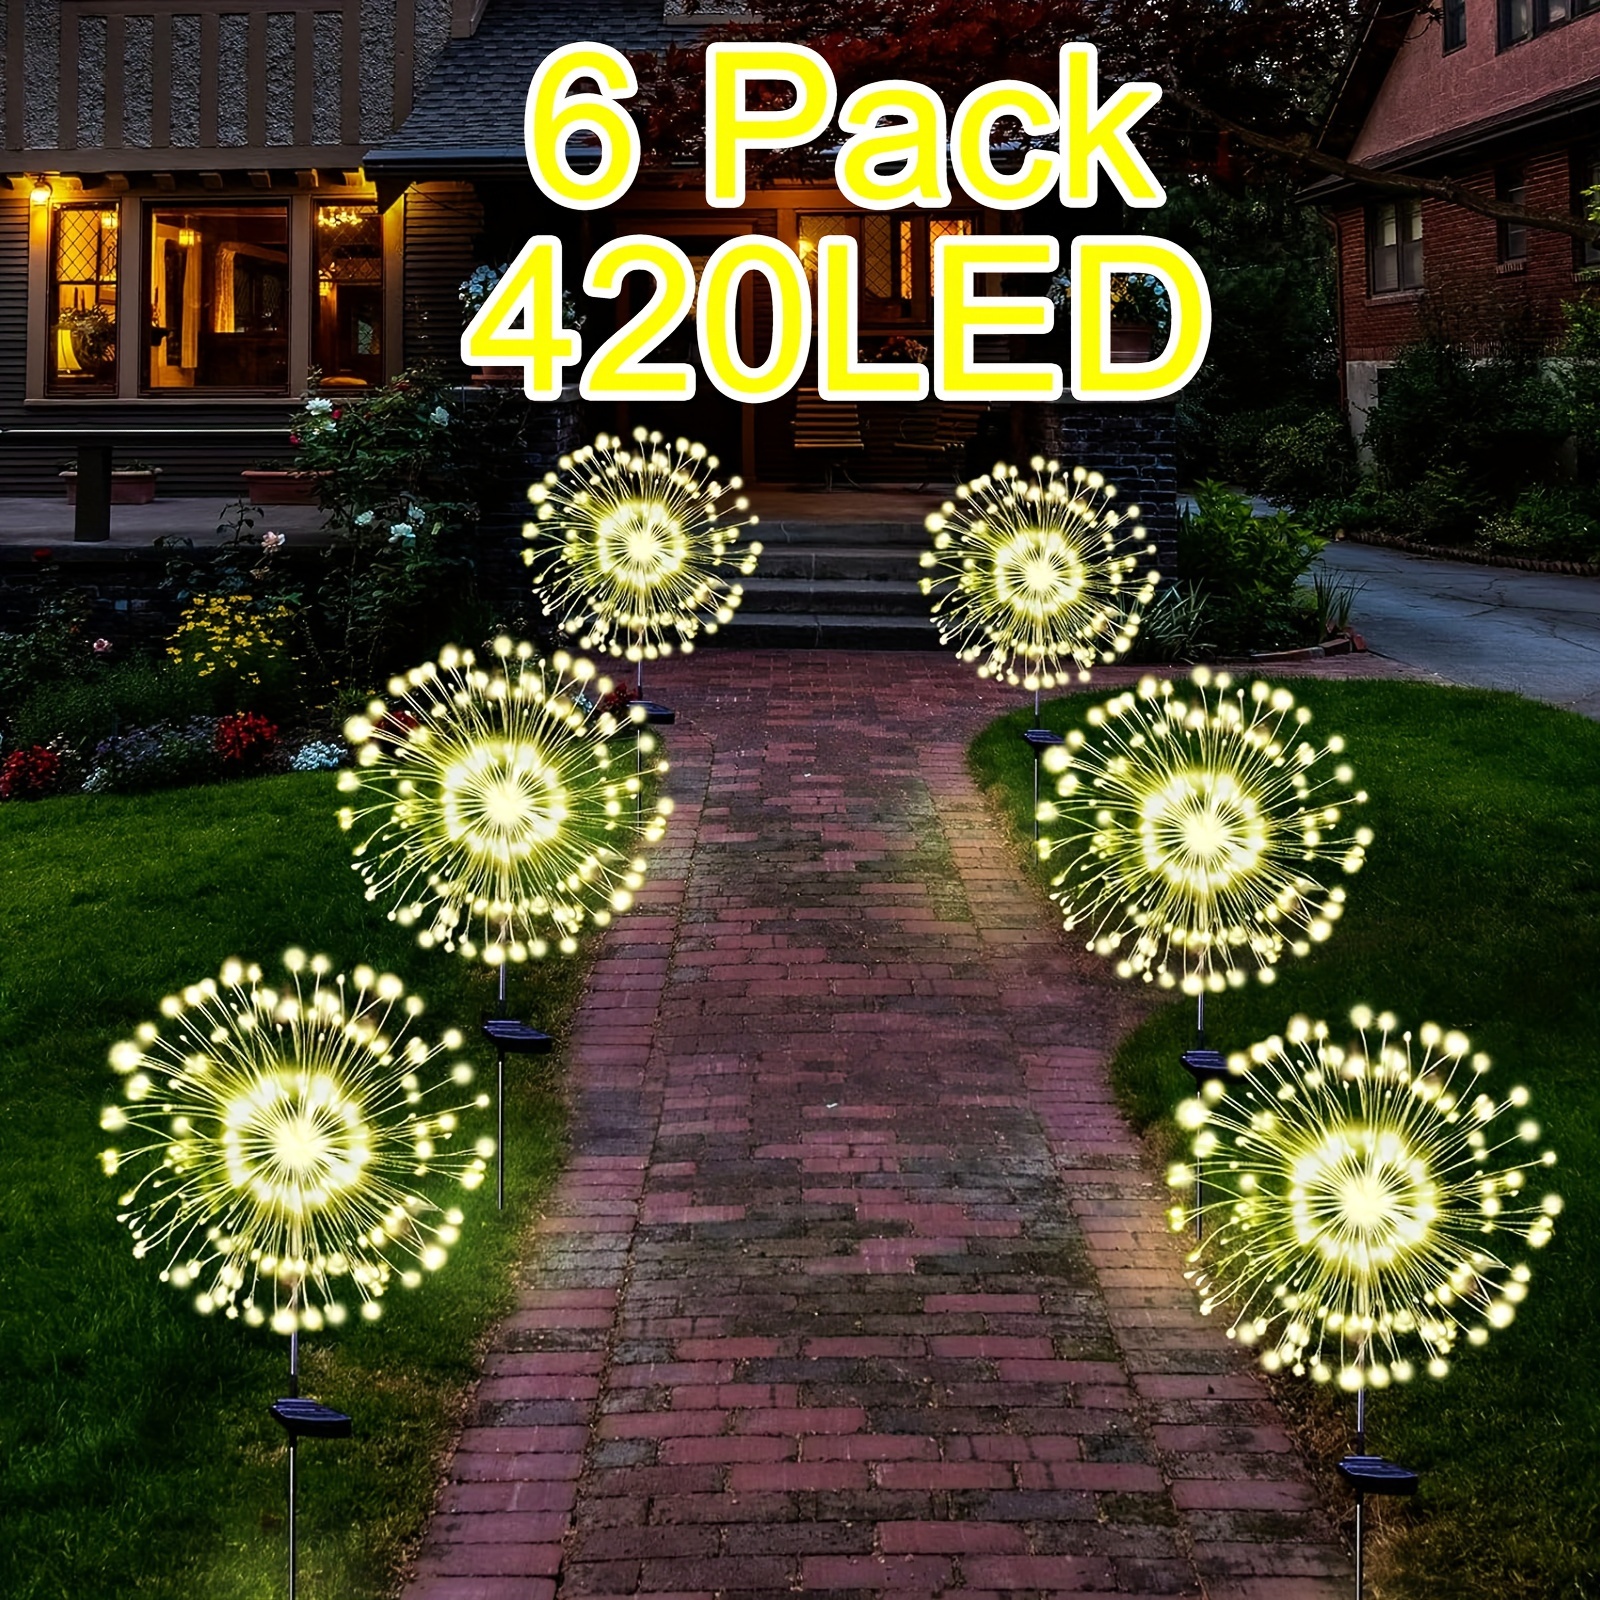 

6 Packs, Solar Lights Outdoor Ip65 Waterproof 6 Pack Solar Powered Firework Stake Lights 420 Led Sparklers Solar Outside Lights For Yard Pathway Flowerbed Decor (colorful, Yellow)